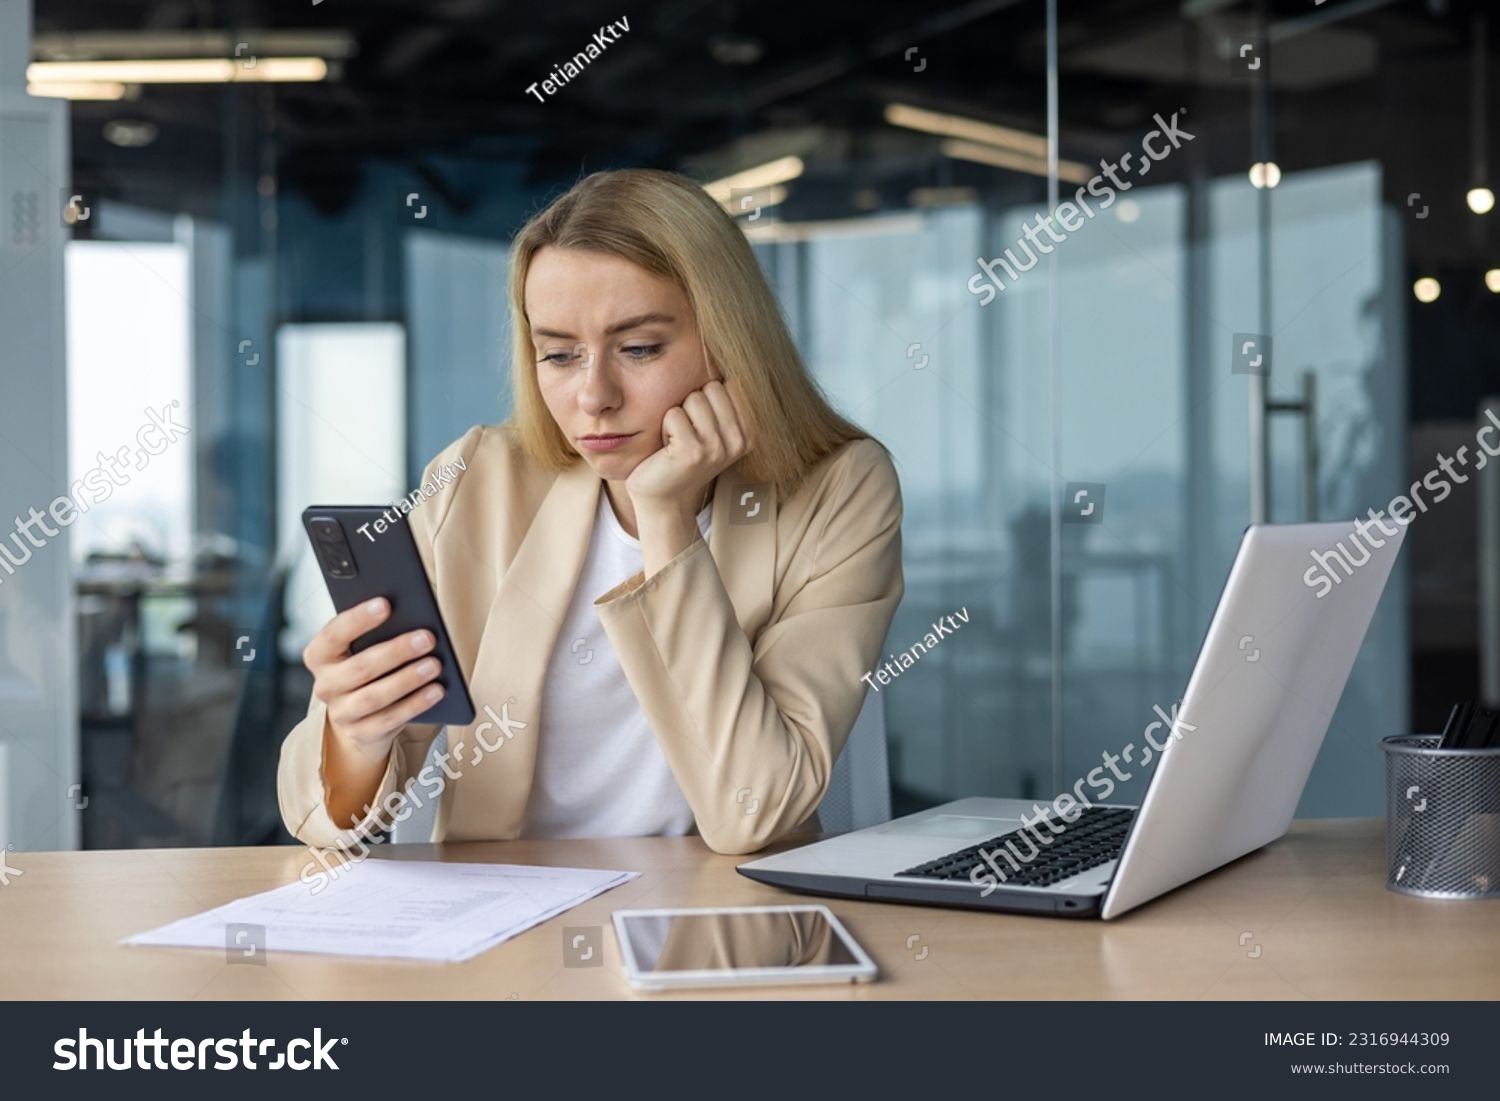 Sad and disappointed woman received bad news online, business woman at workplace inside office in depression reading bad news using app on smartphone, female worker with phone in hands thoughtful. #2316944309